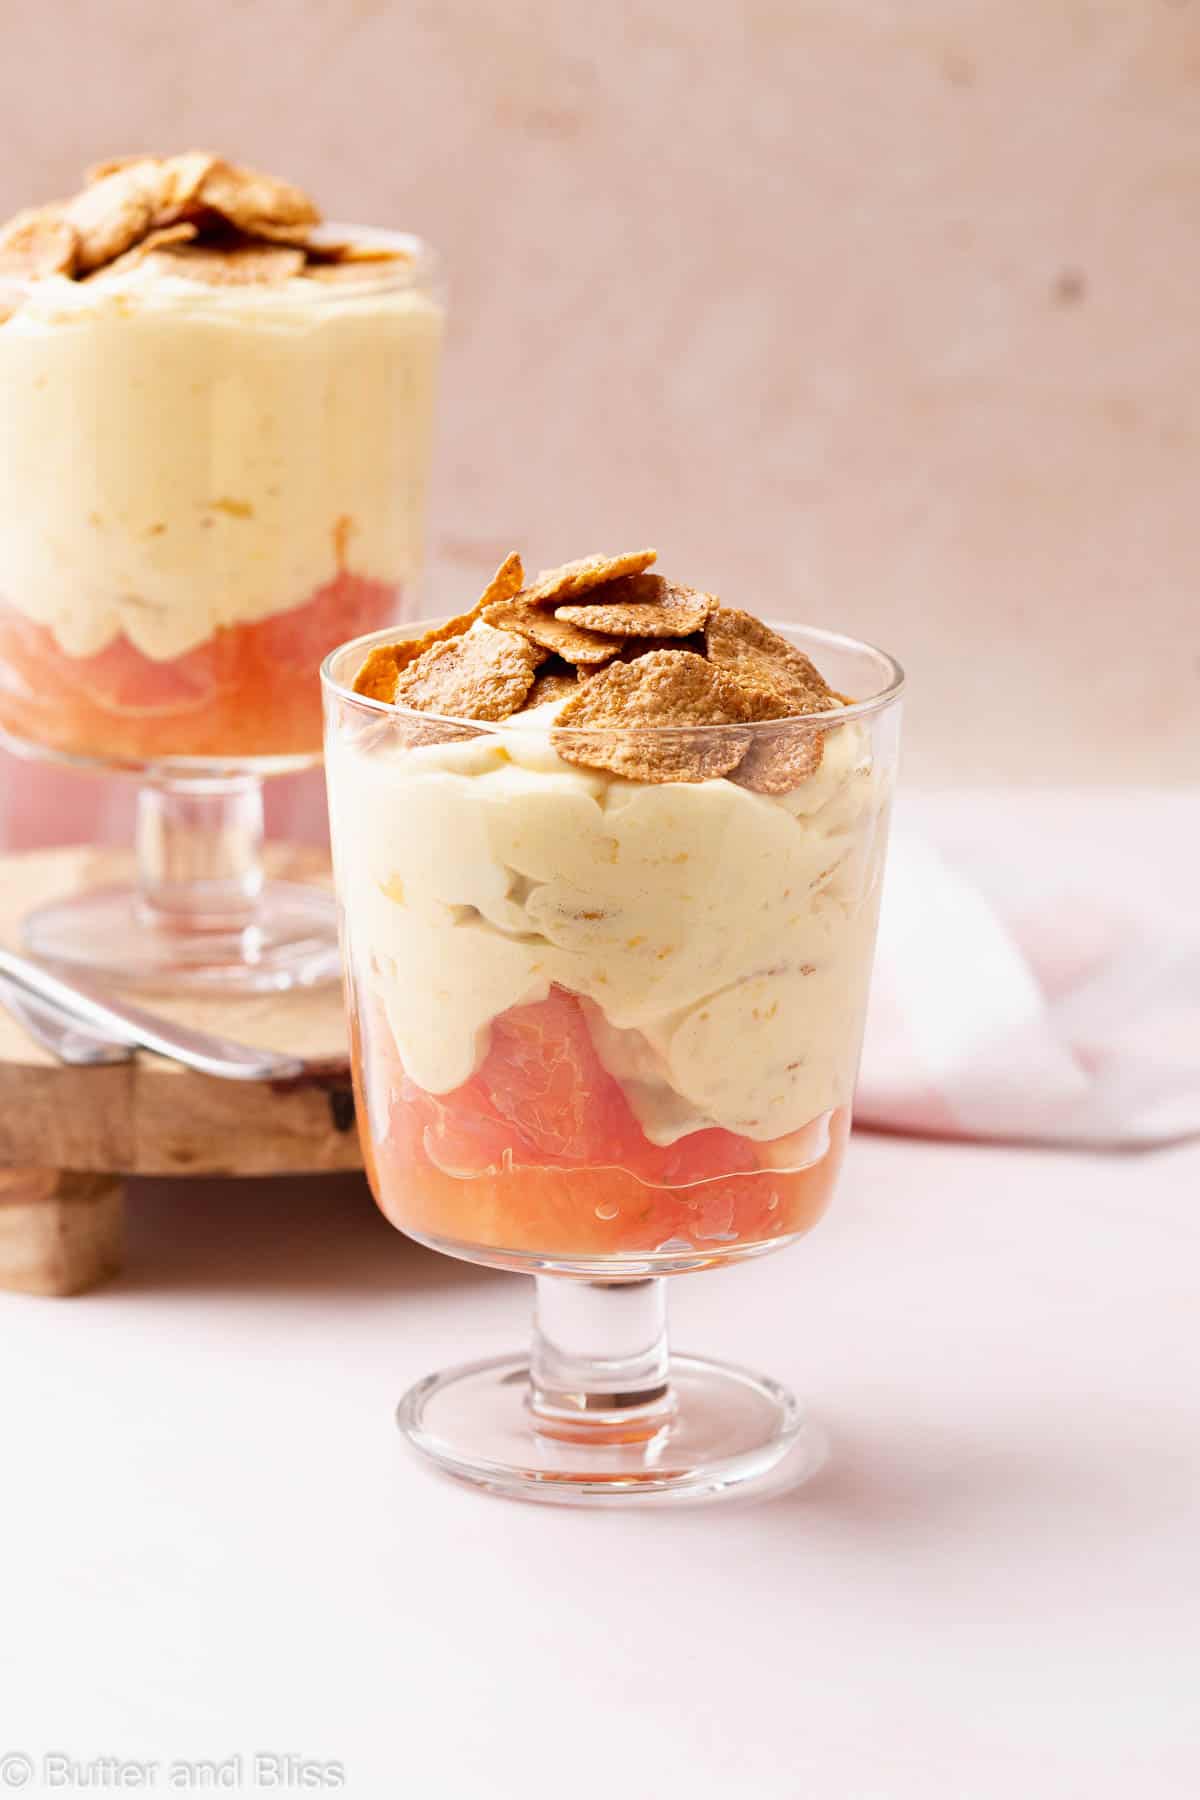 Delicious and creamy mango cream spring dessert in a parfait glass layered with grapefruit and cornflakes